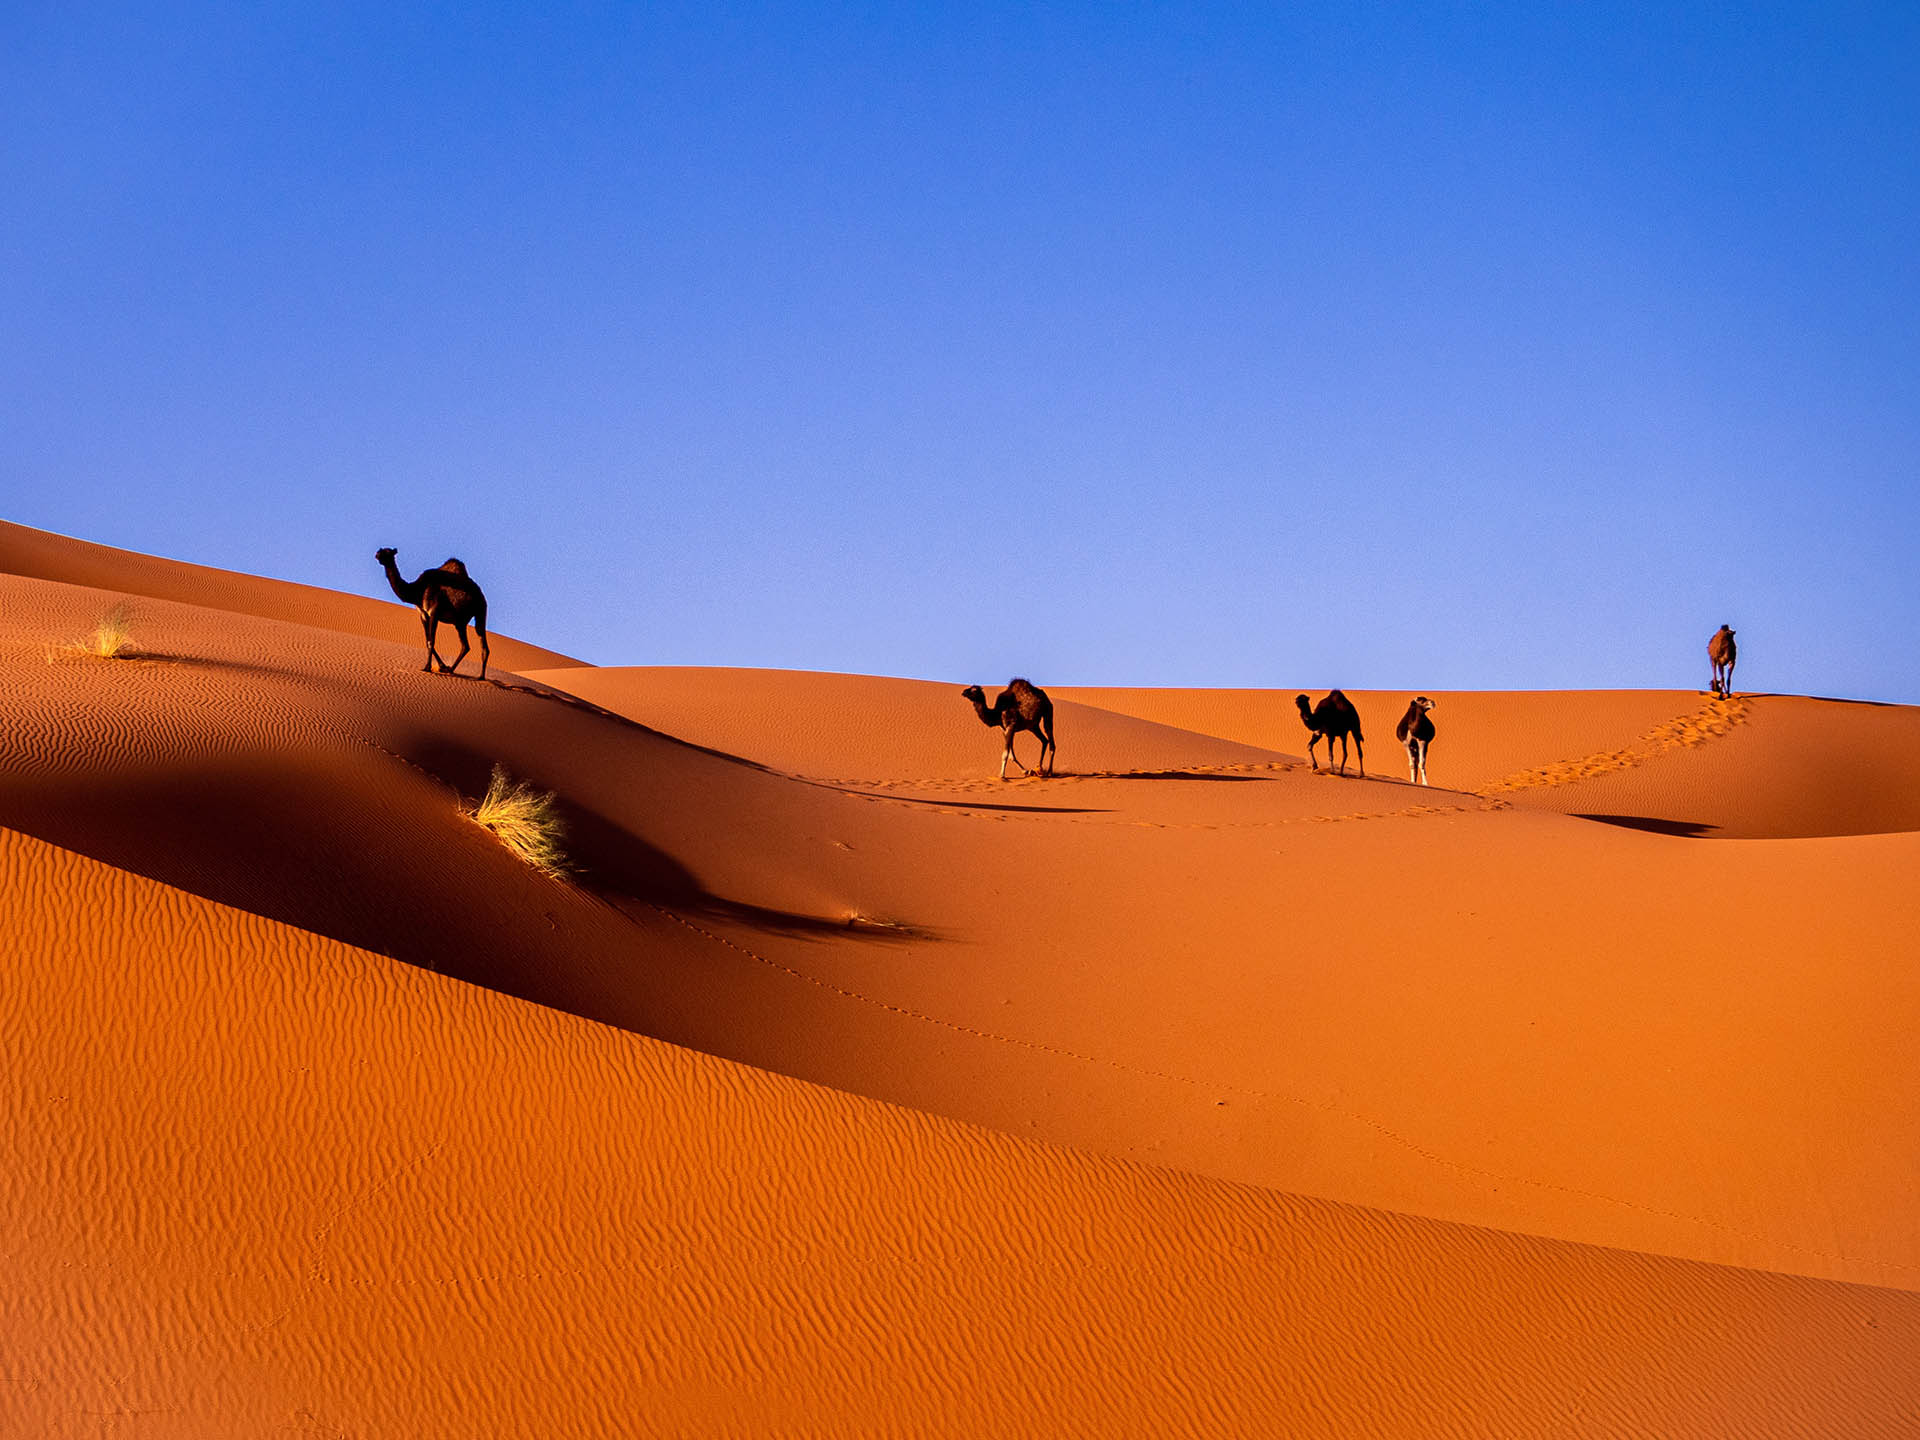 Luxury desert experience by Private Jet from Marrakech